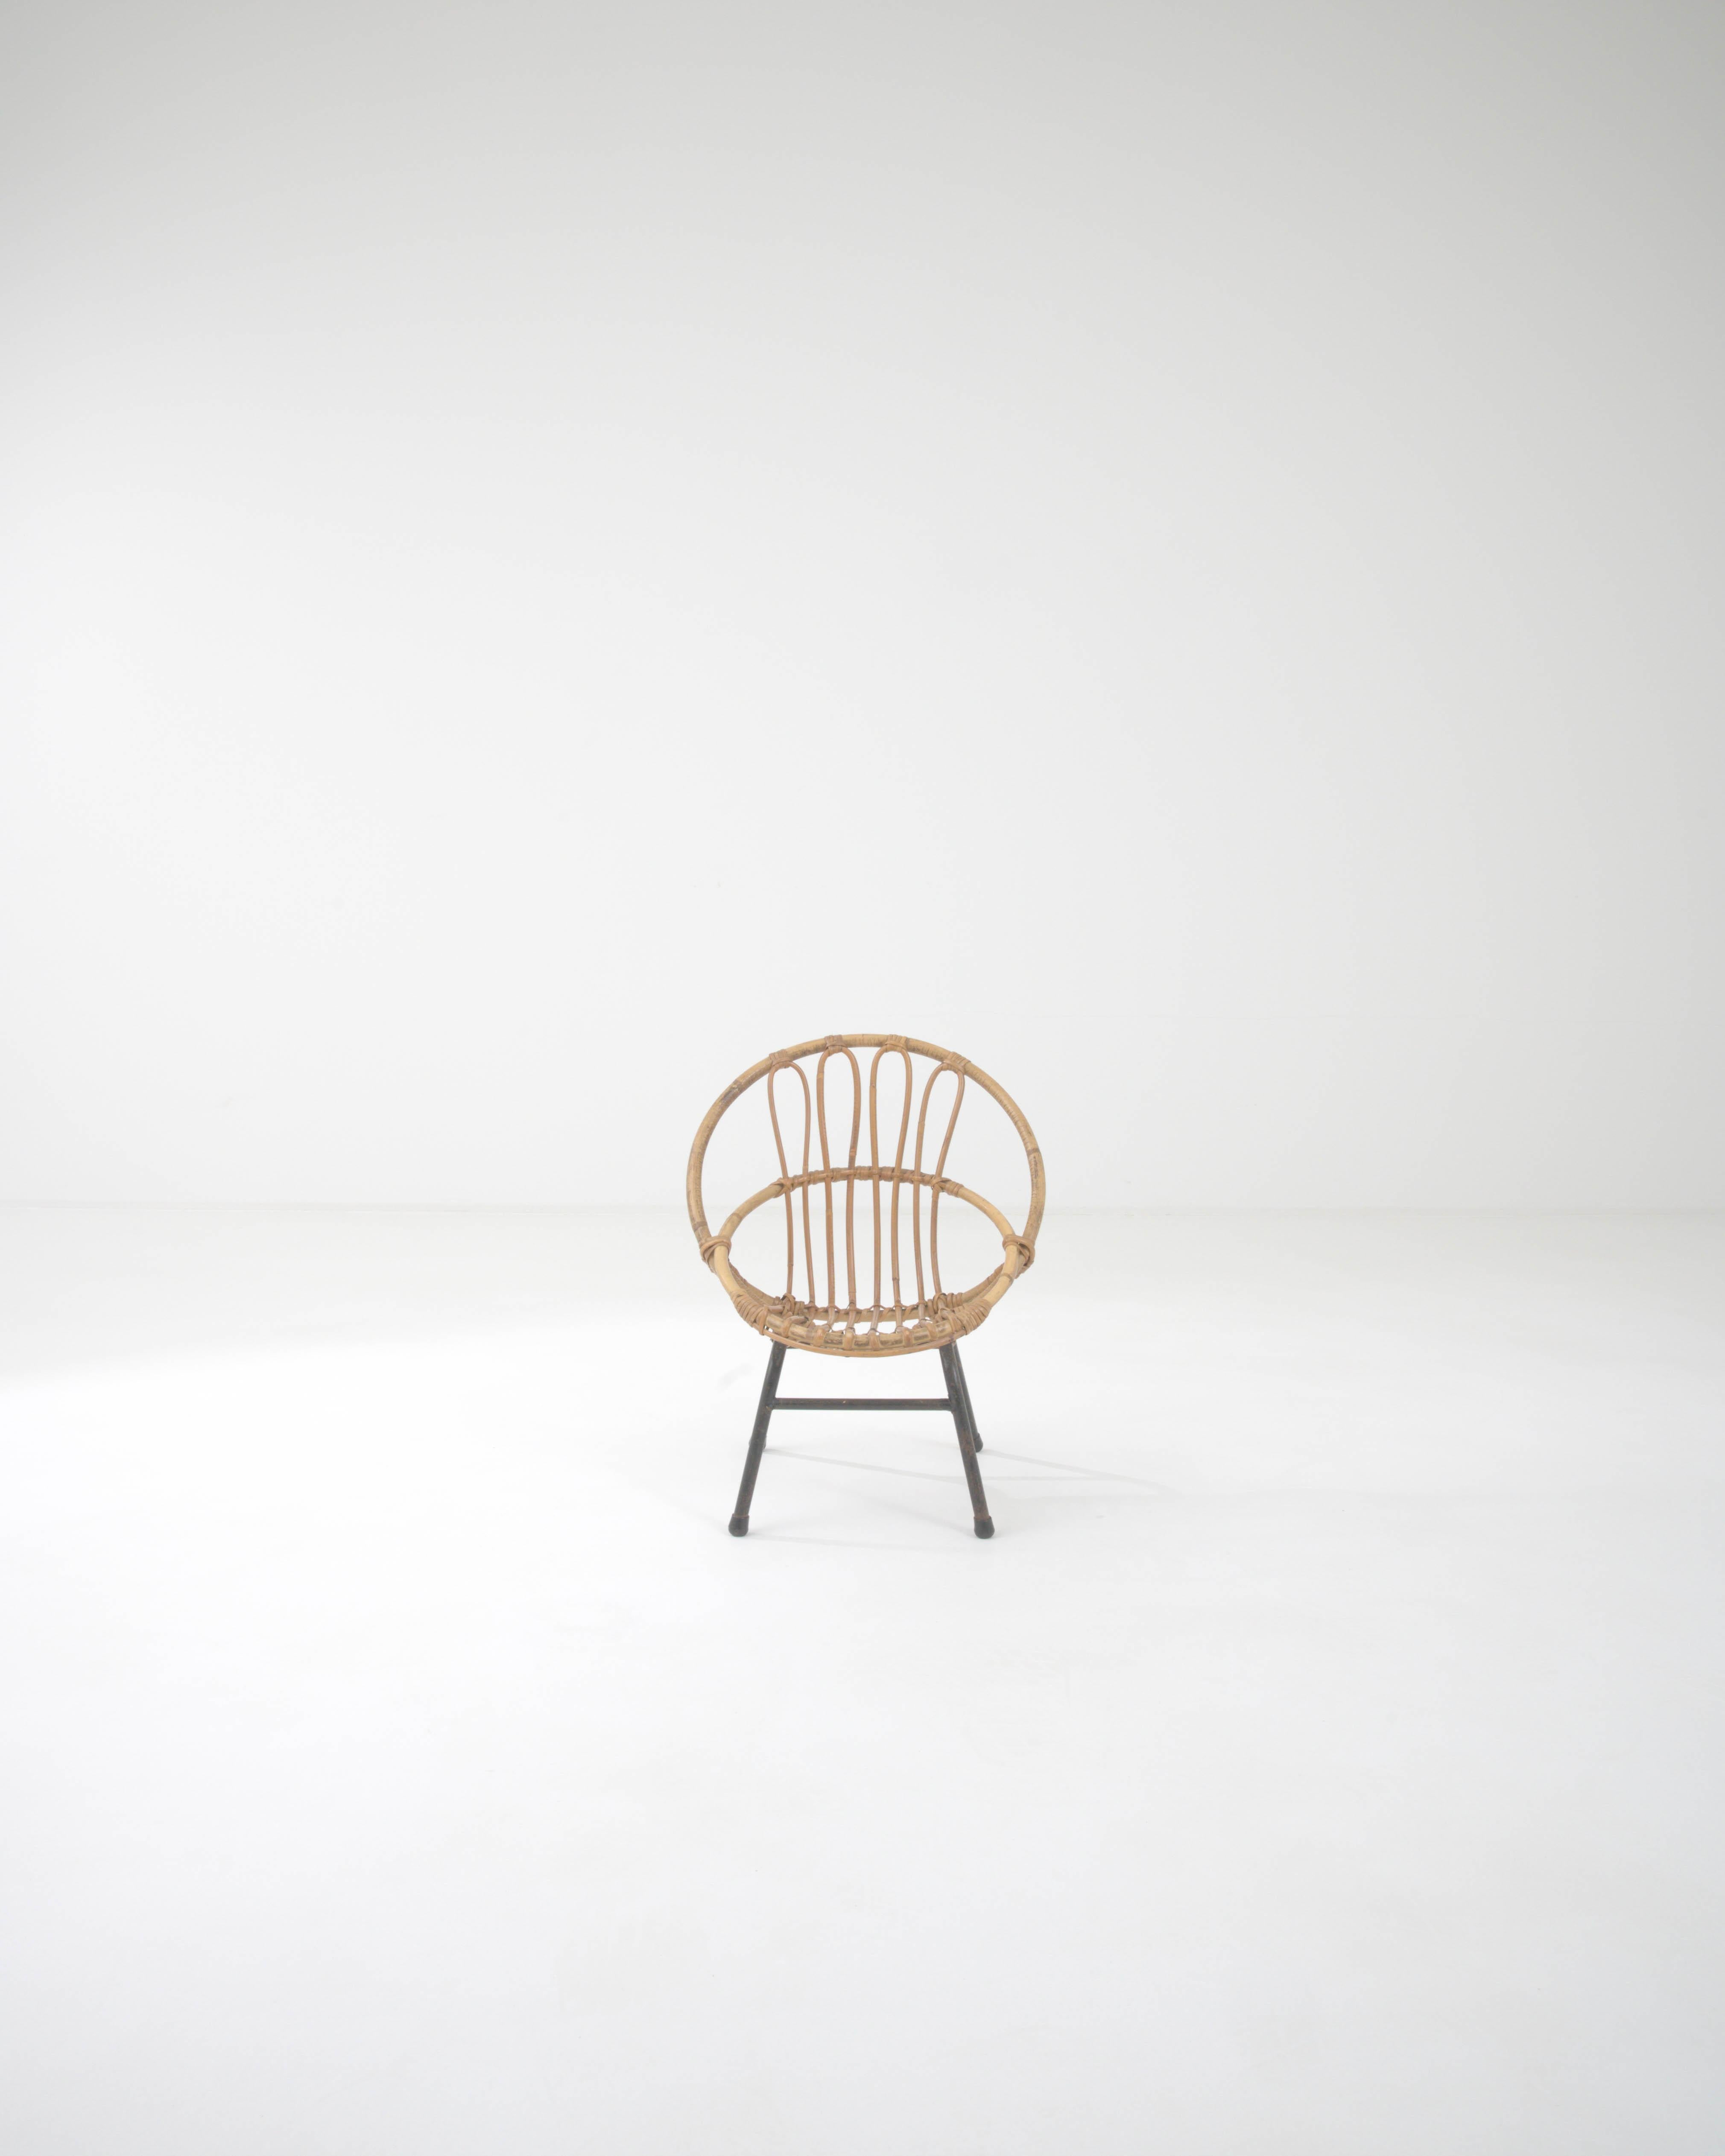 A child's chair from France, circa 1960. This french-made miniature armchair is a playful twist on a midcentury classic. Using lashed together rattan, artisans have crafted a chair both geometrically pleasing and surprisingly comfortable. Created by